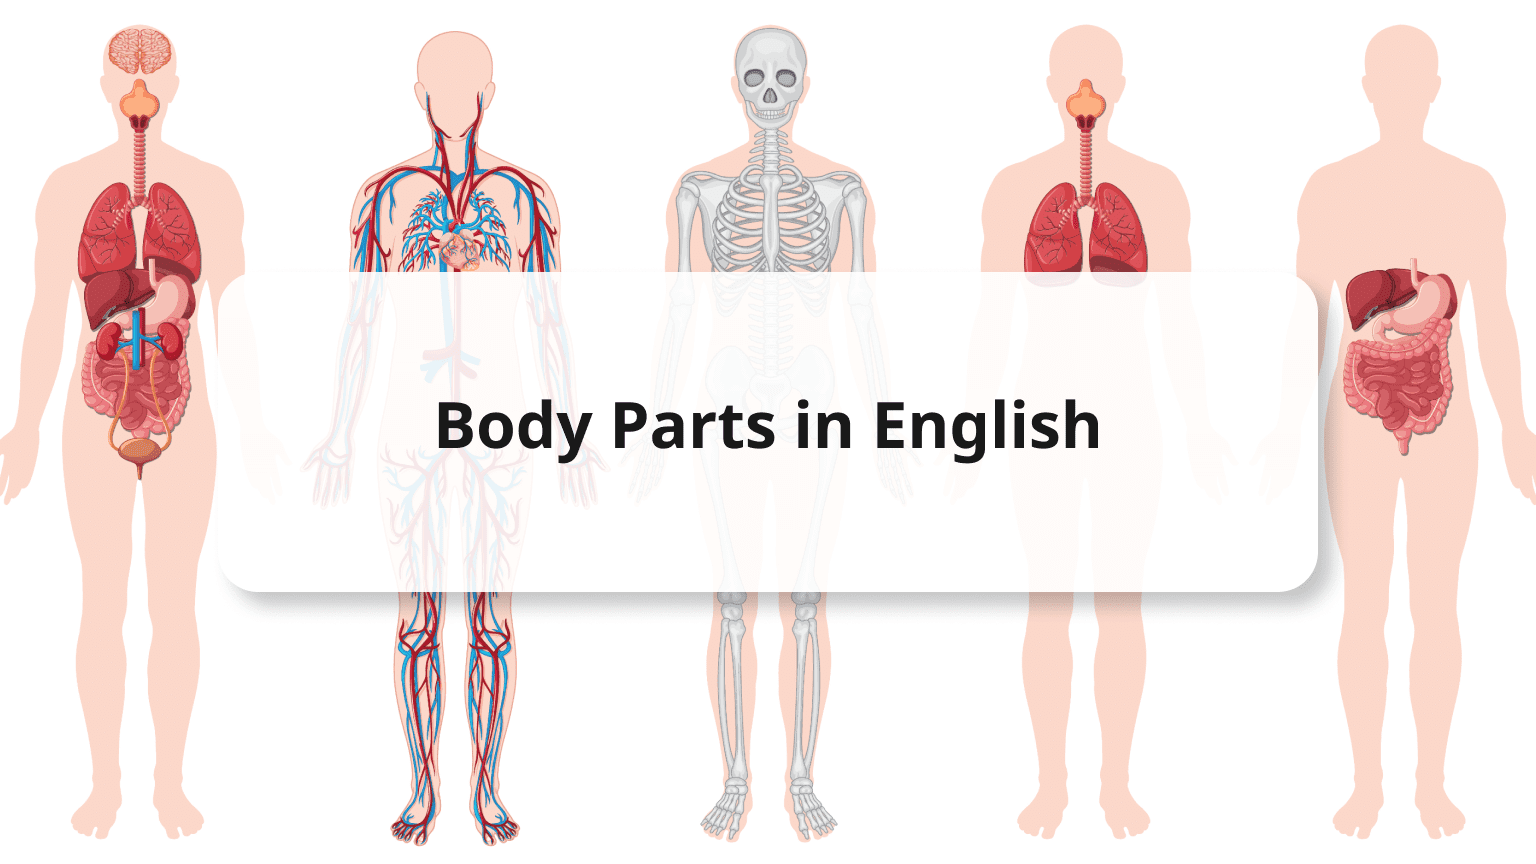 Parts of the Body